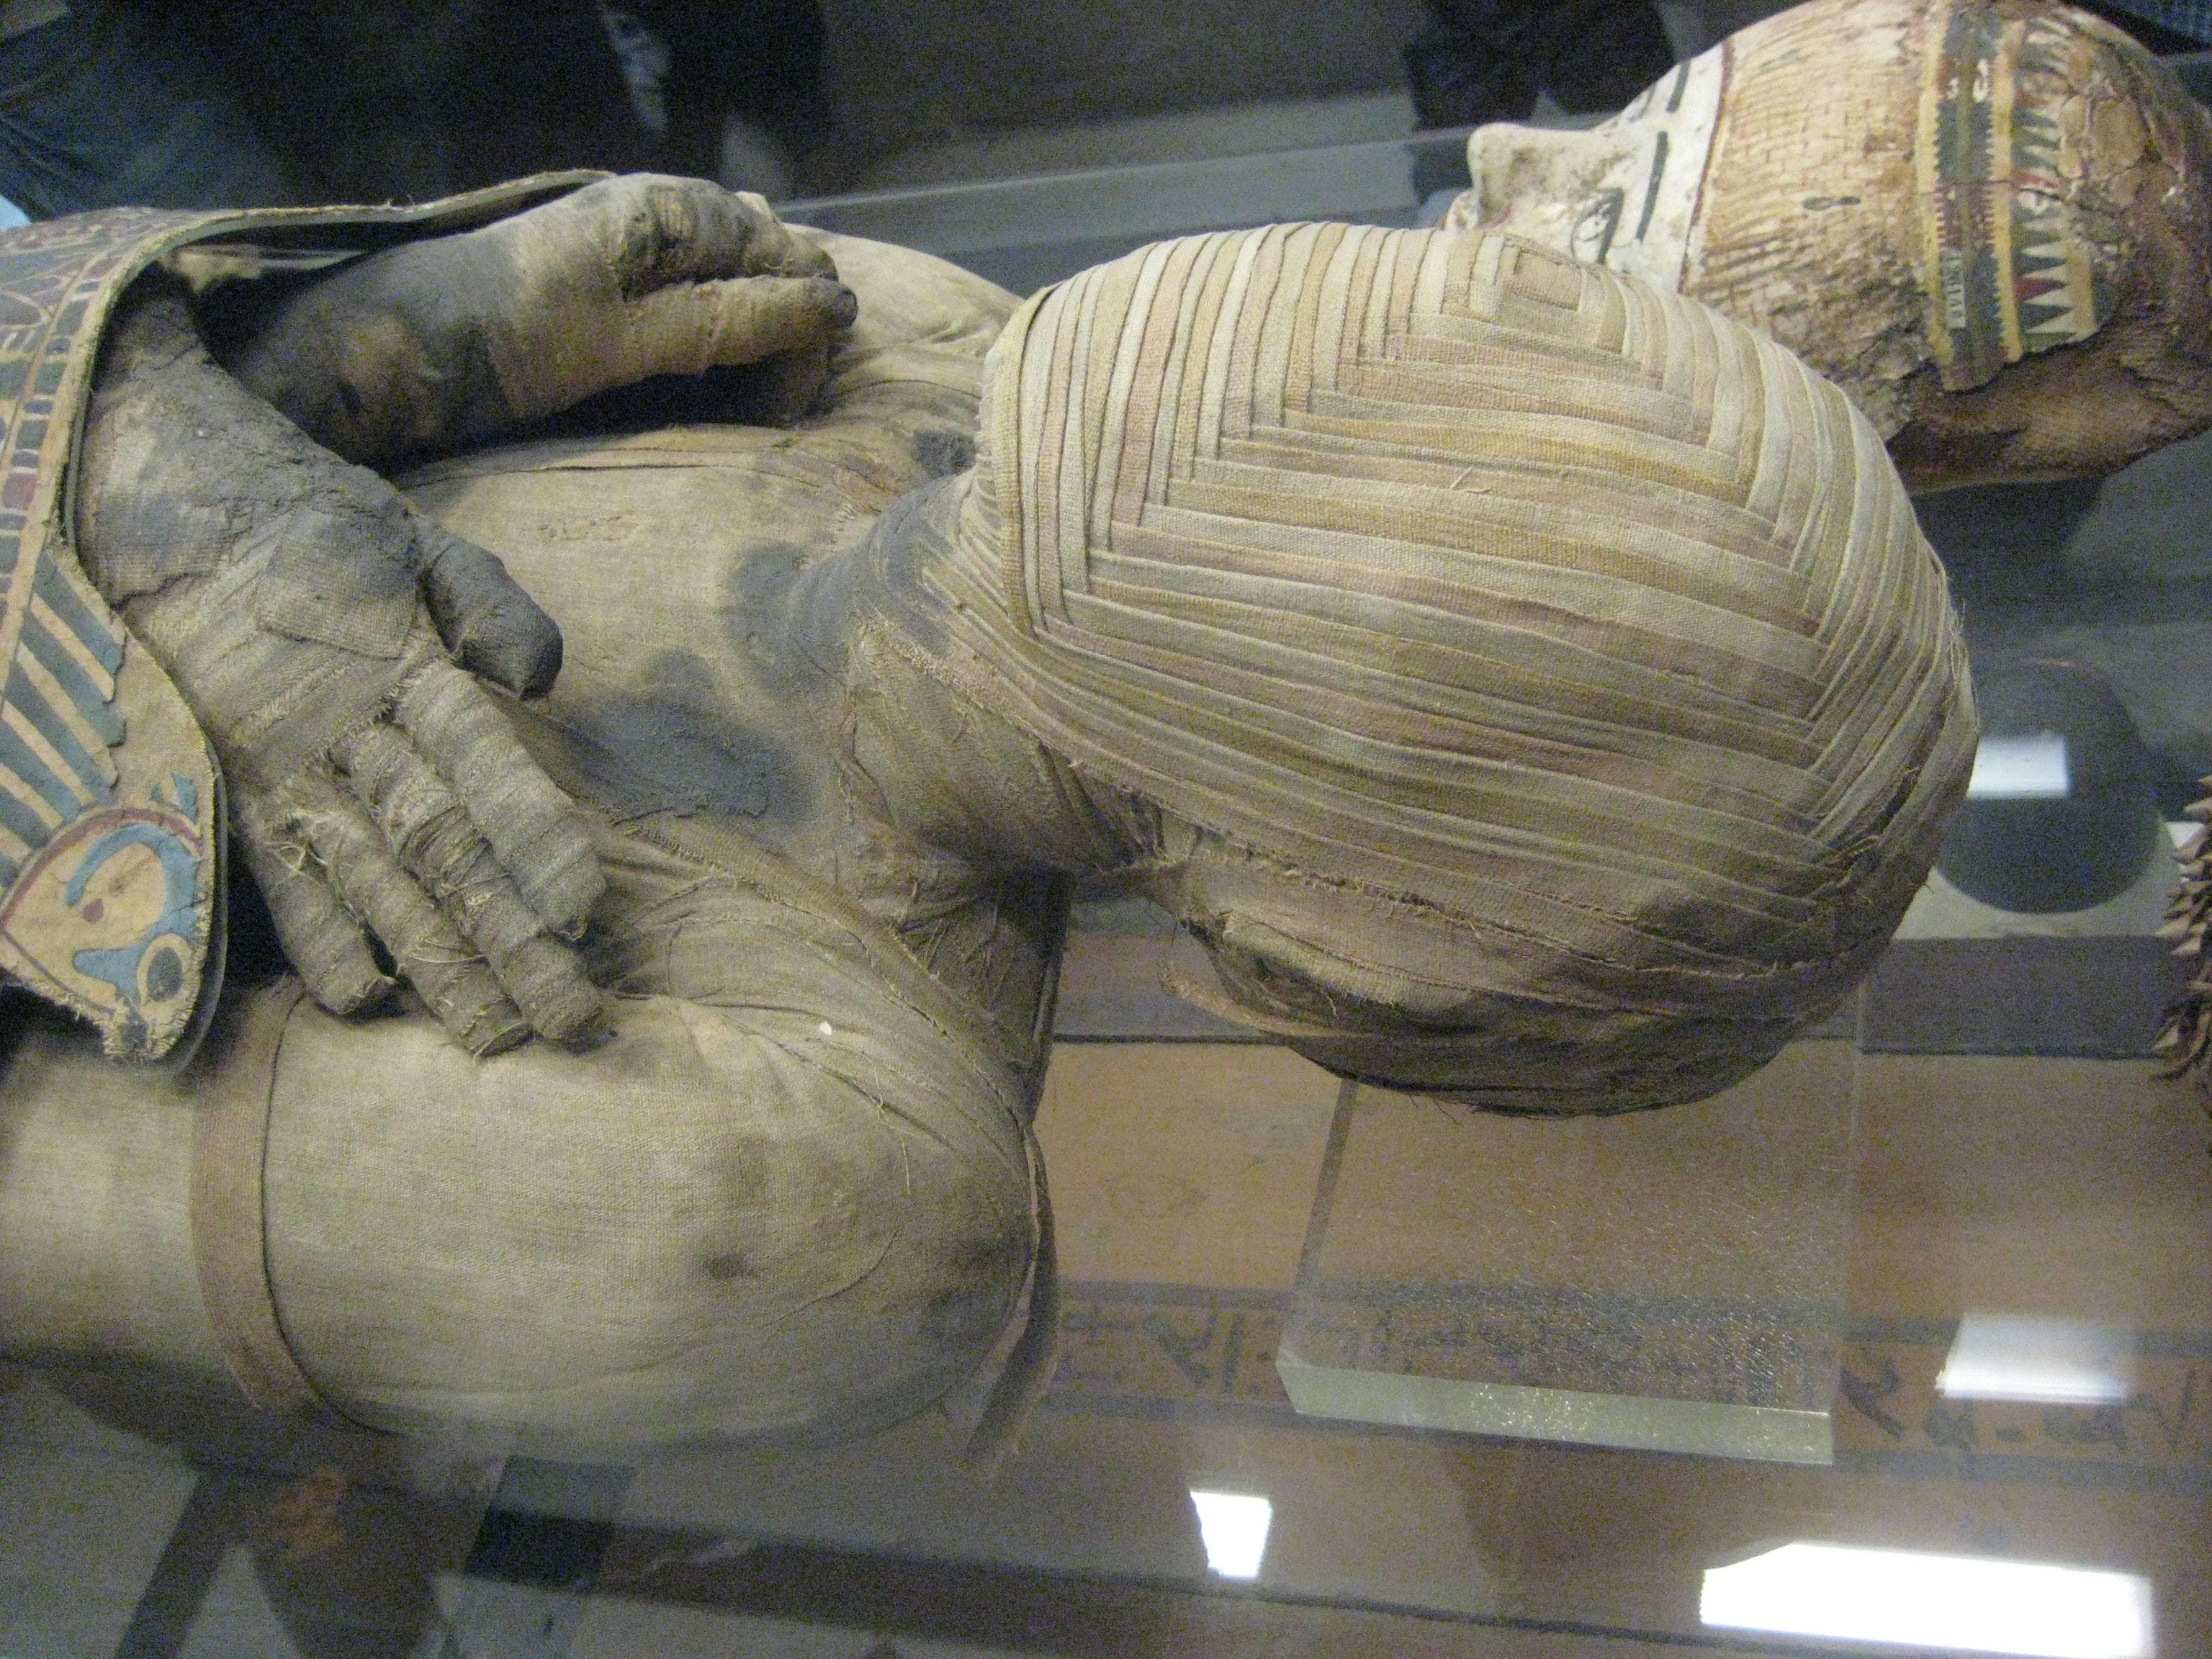 Random Pictures Of Mummies That Made Us Say 'Whoa'